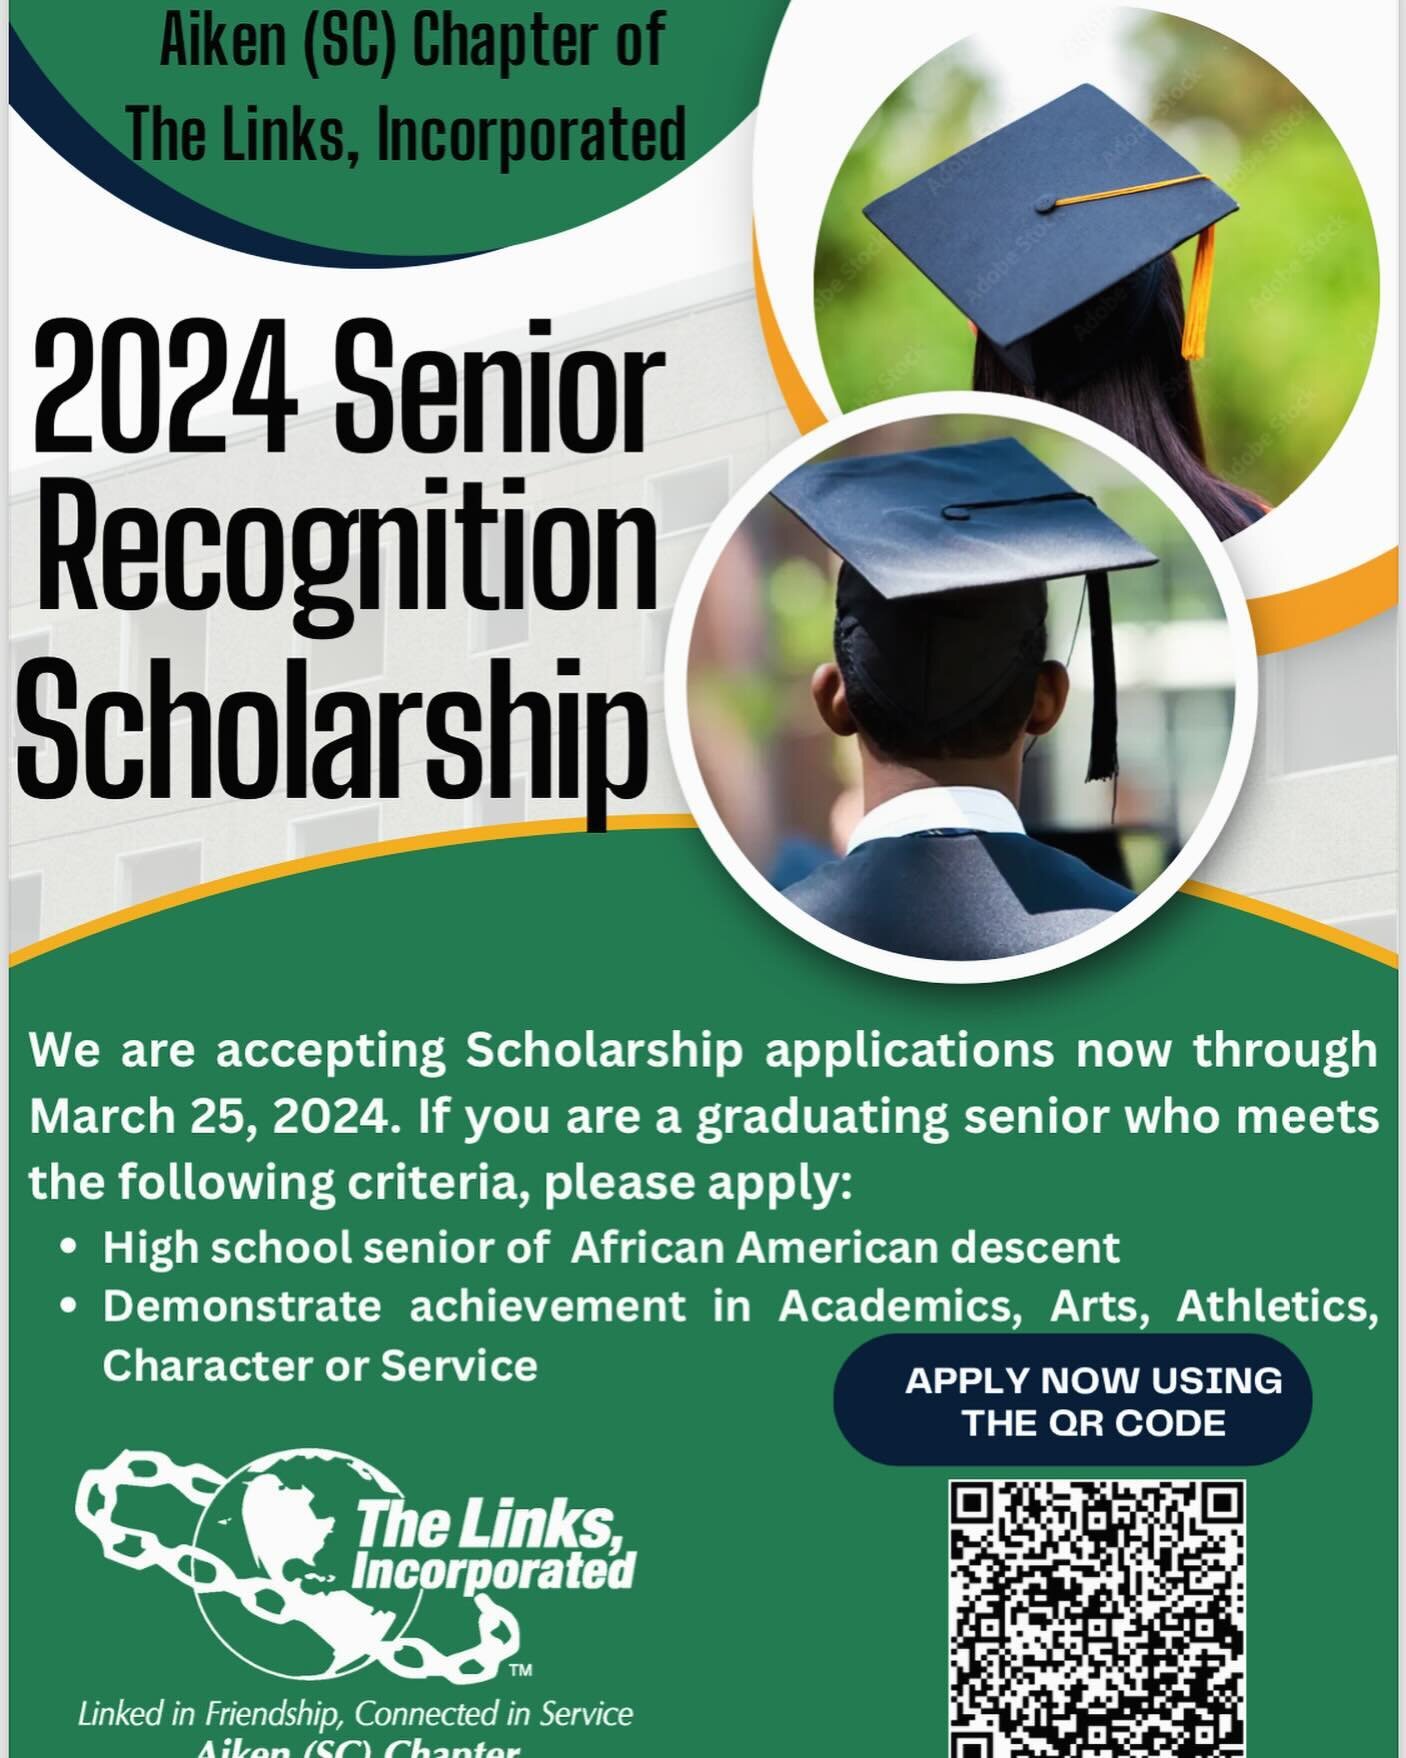 The Aiken (SC) Chapter is accepting applications for our 2024 Senior Recognition Scholarship. Apply now by using the QR Code. Deadline is March 25, 2024 #salinksinc #linksinc